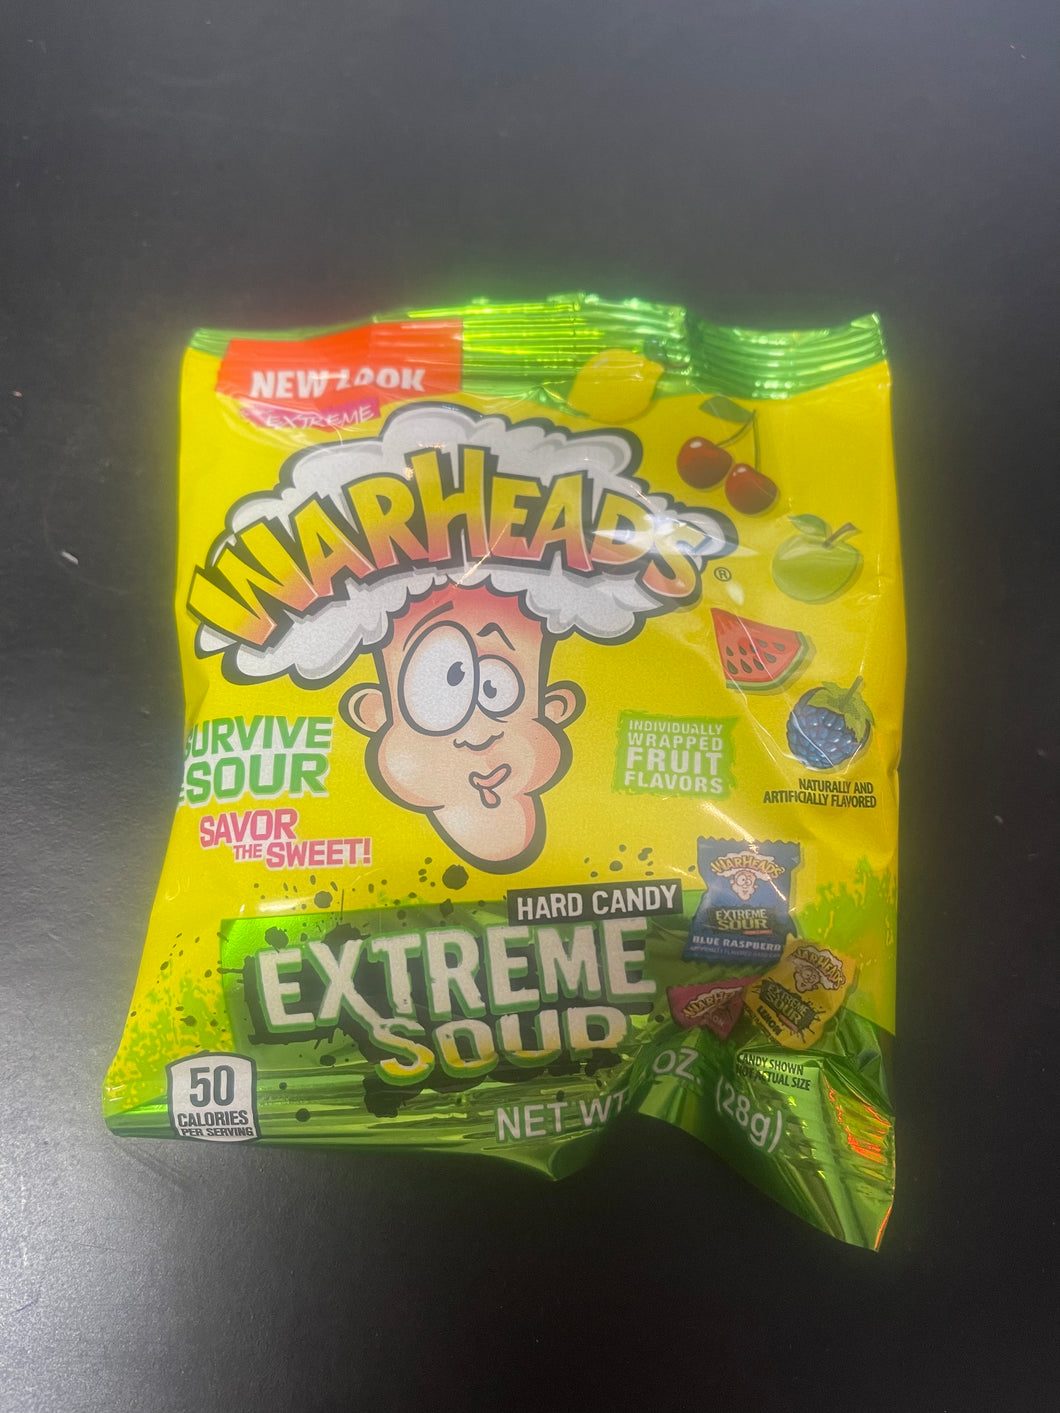 Warheads Extreme Sour Packs